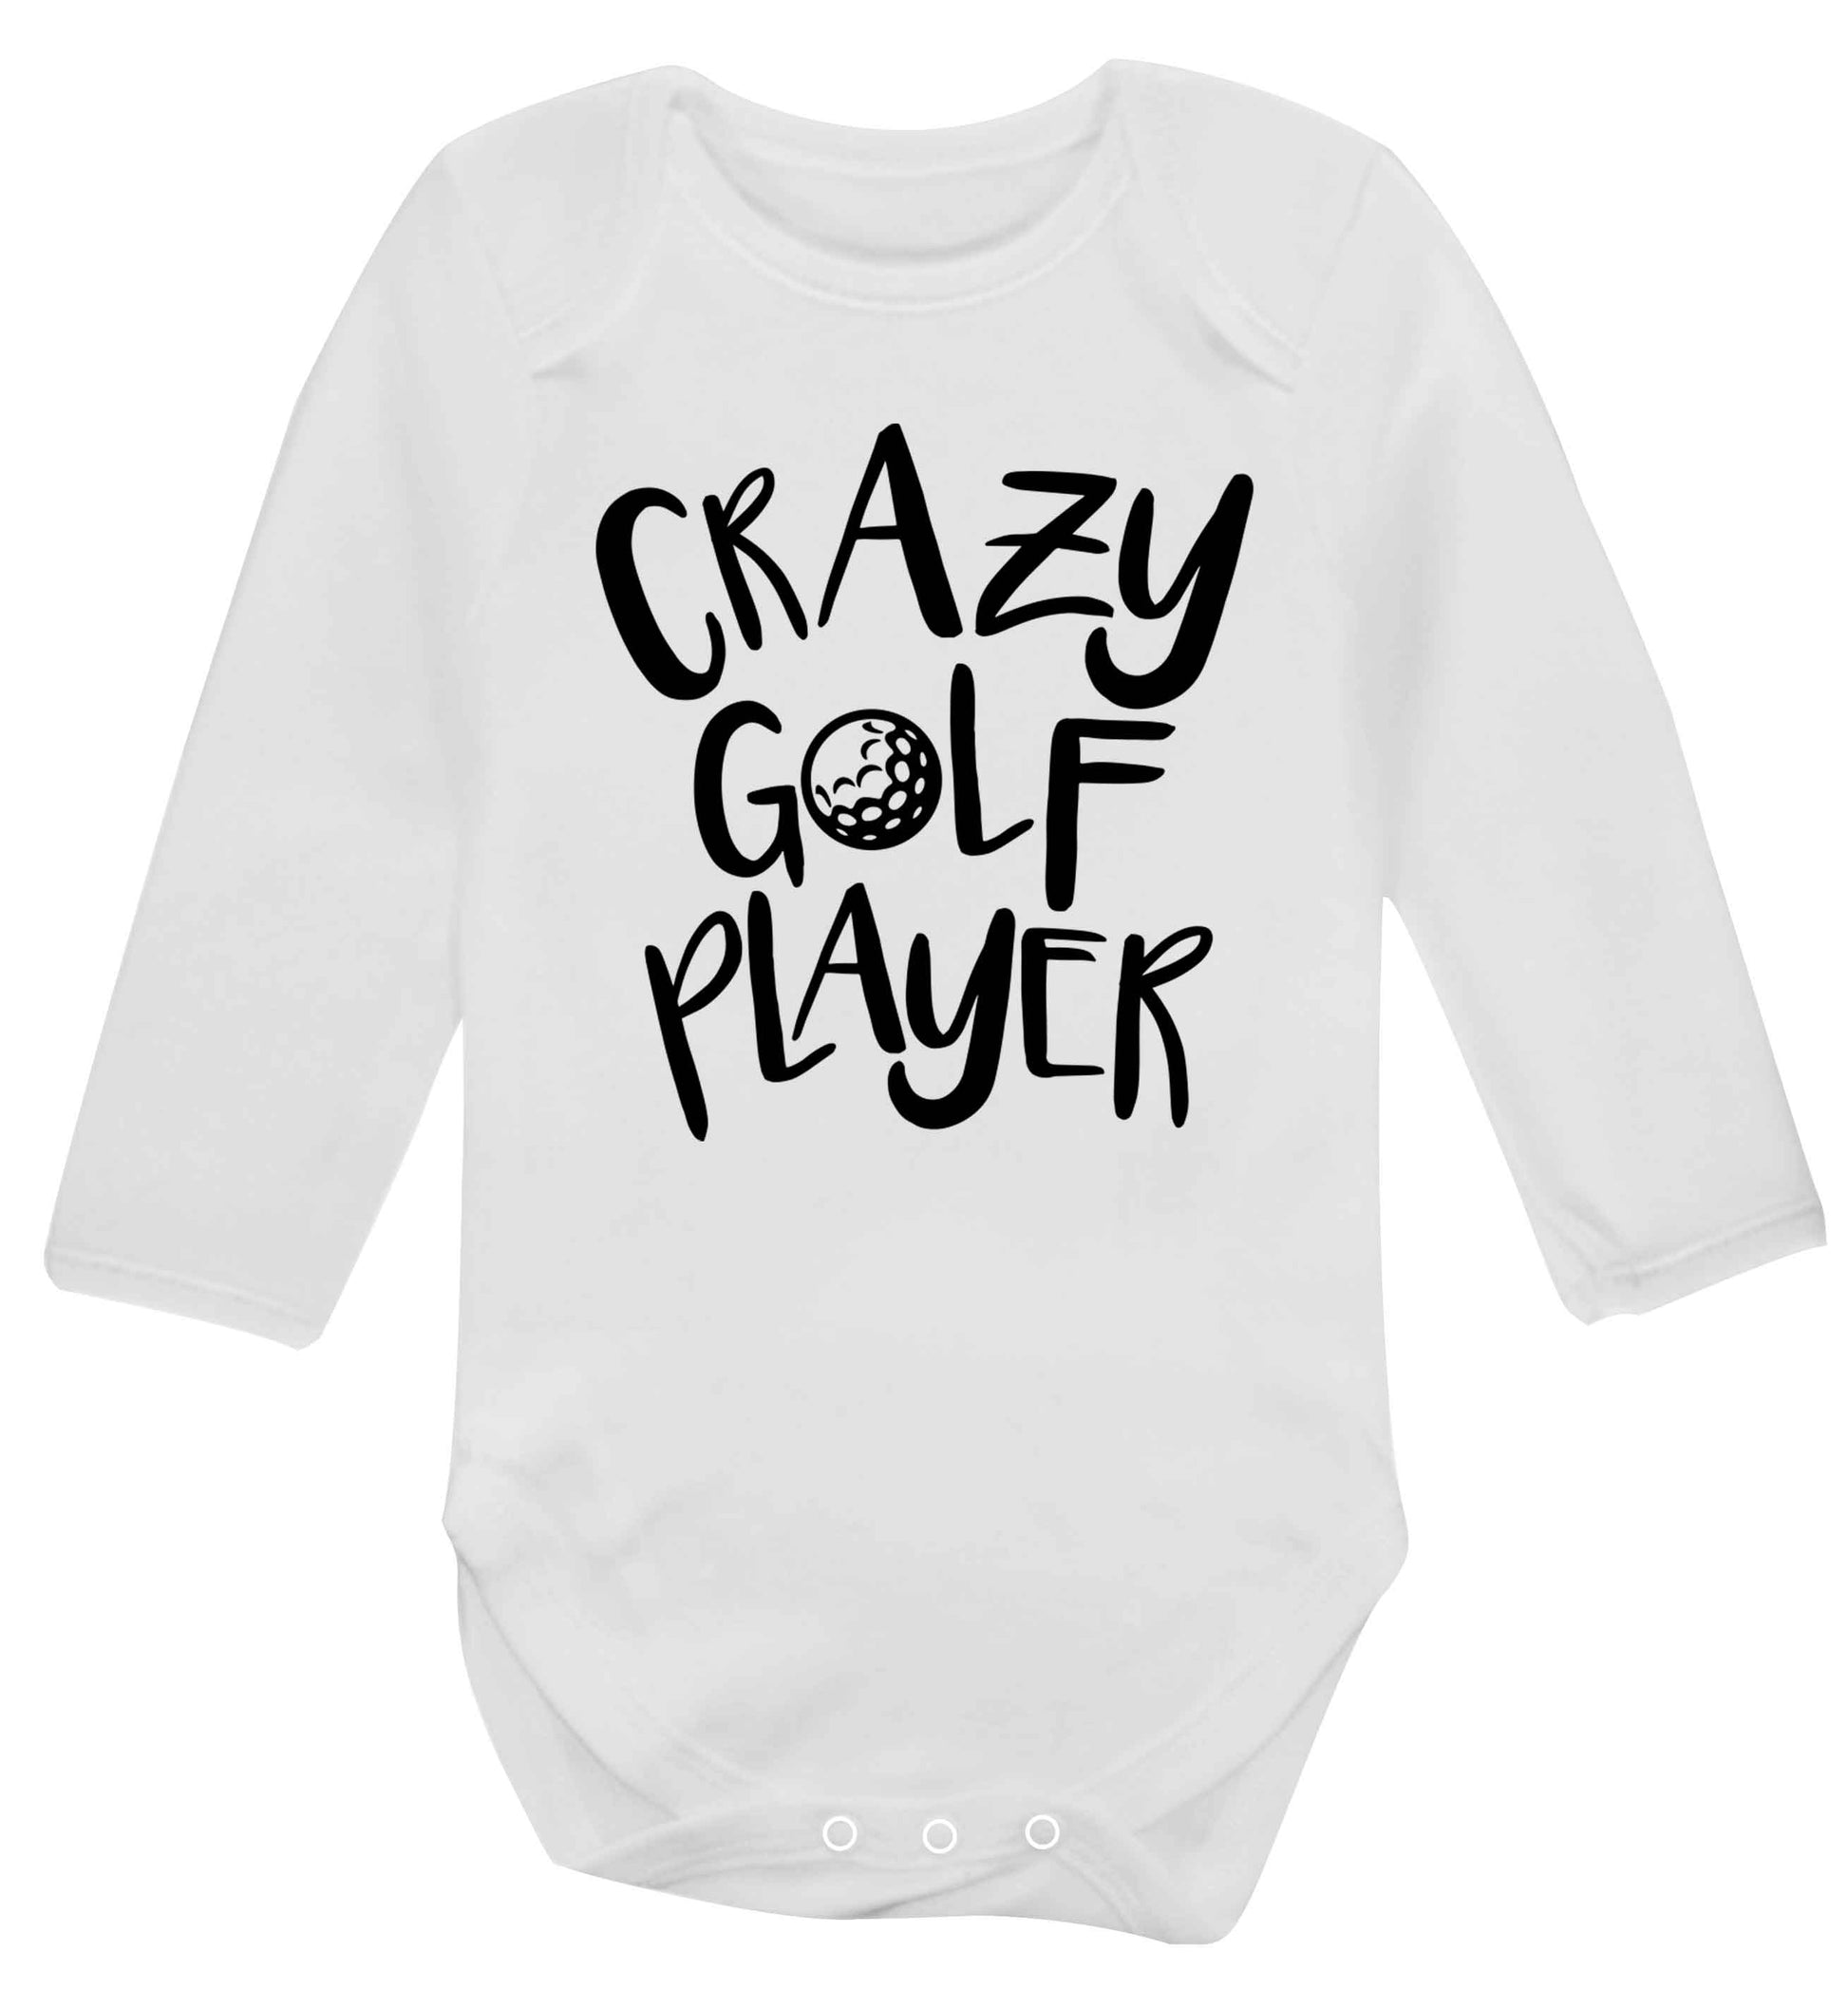 Crazy golf player Baby Vest long sleeved white 6-12 months